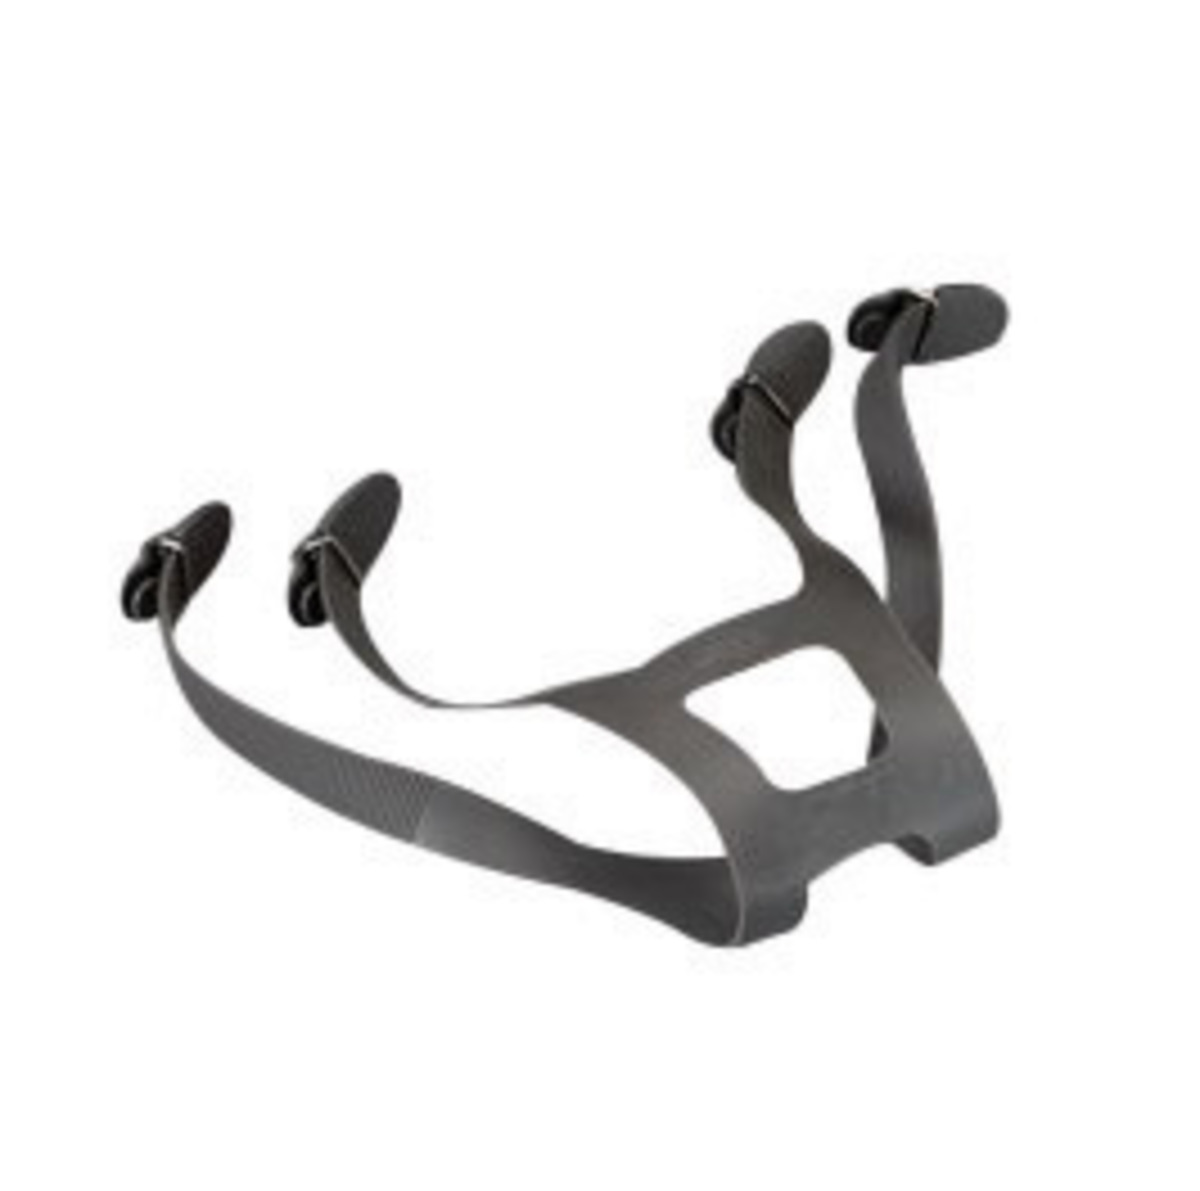 3M™ Head Harness Assembly For 3M™ 6000 Series Full Facepiece Respirator (Availability restrictions apply.)